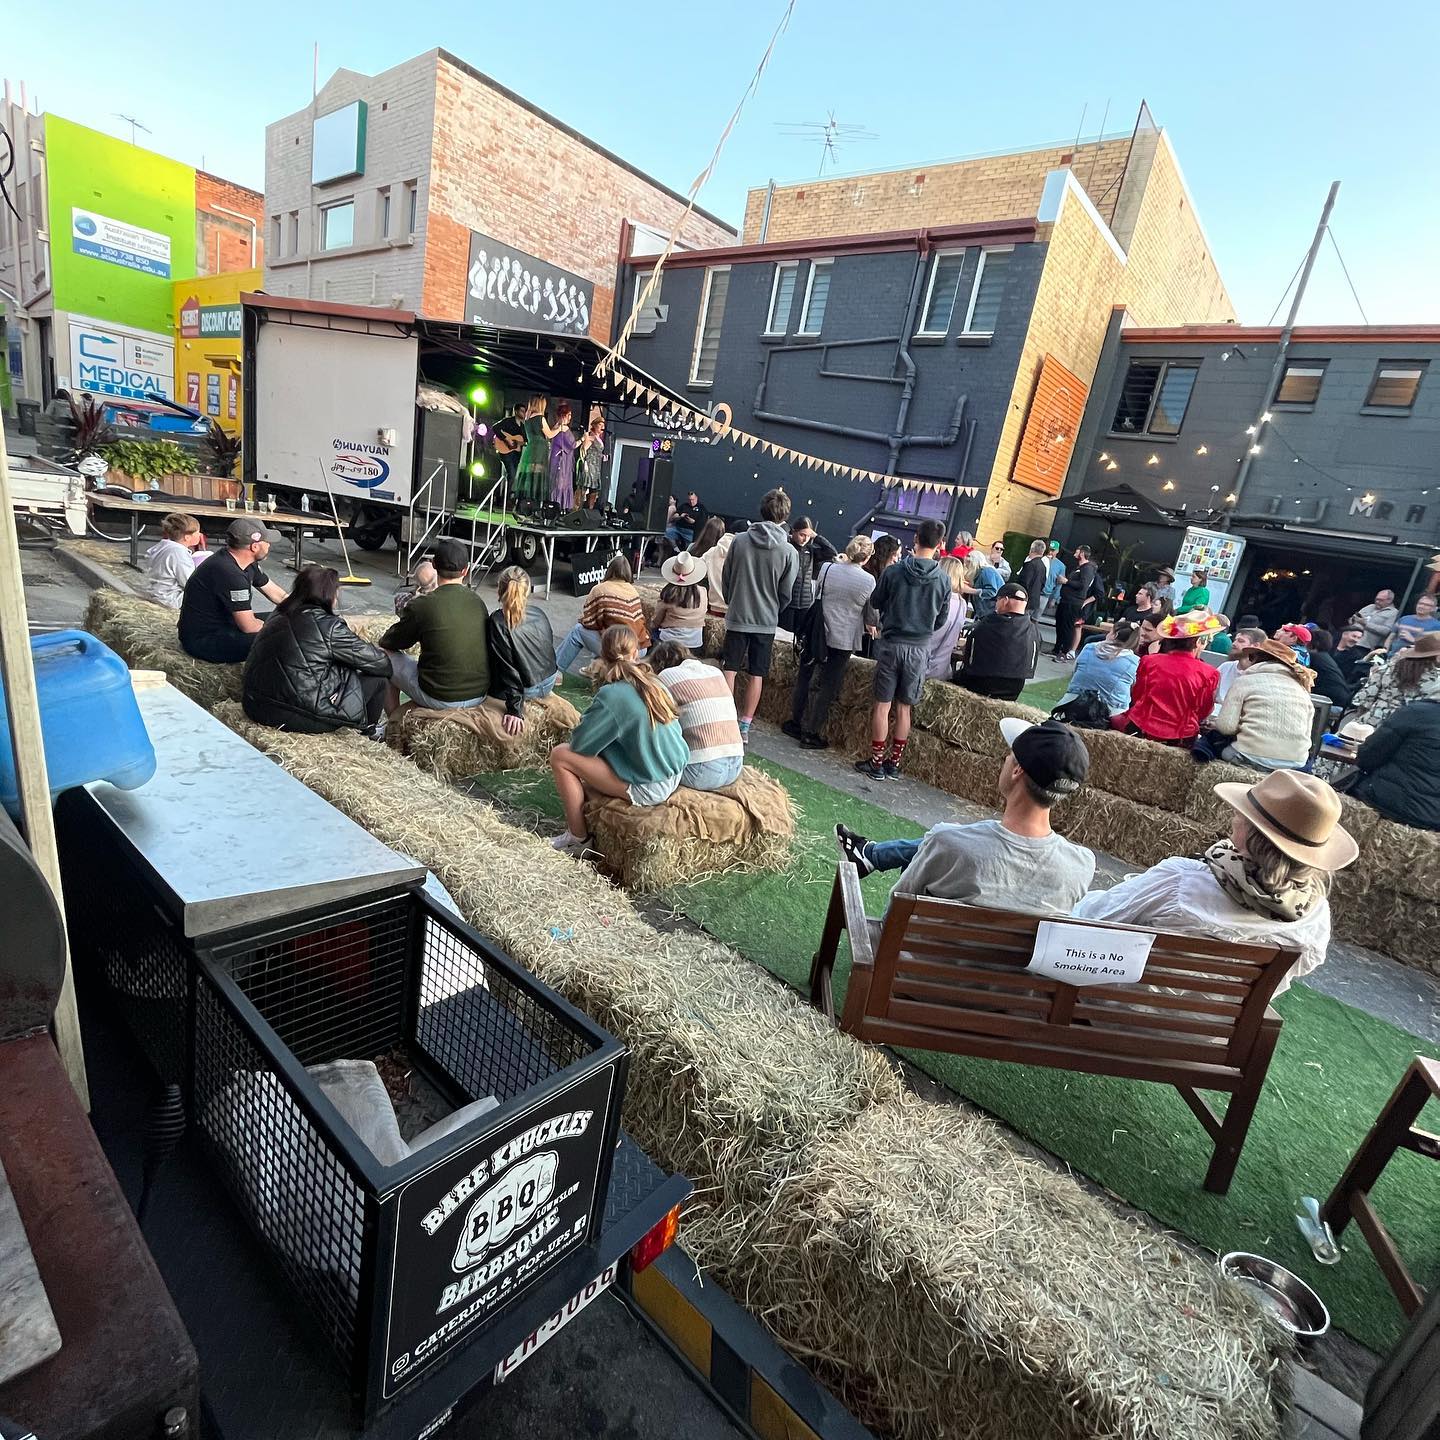 Such a great afternoon spent with our @mrhendersonbar family - listening to some great country music whilst feeding the masses !!!  - shops also open for dinner.. till 8pm. 🏻 - Giddy up !!#lownslow #lownslowbbq #barbeque #barbecue #itsgoodbbq #brisket #pork #lamb #chicken  #brisbane #queensland #australia #sleepwhenimdead #allinnbrewingco #traditionalbbq #bareknucklesbbq #bareknucklesbarbeque #bareknucklesbarbecue #bareknucklesbbqaus #bareknucklesbbqaustralia #bareknucklesbarbecueaustralia #barknucklesbarbecueaus #bareknucklesbarbequeaus #bareknucklesbarbequeaustralia #ubereats #meathustler